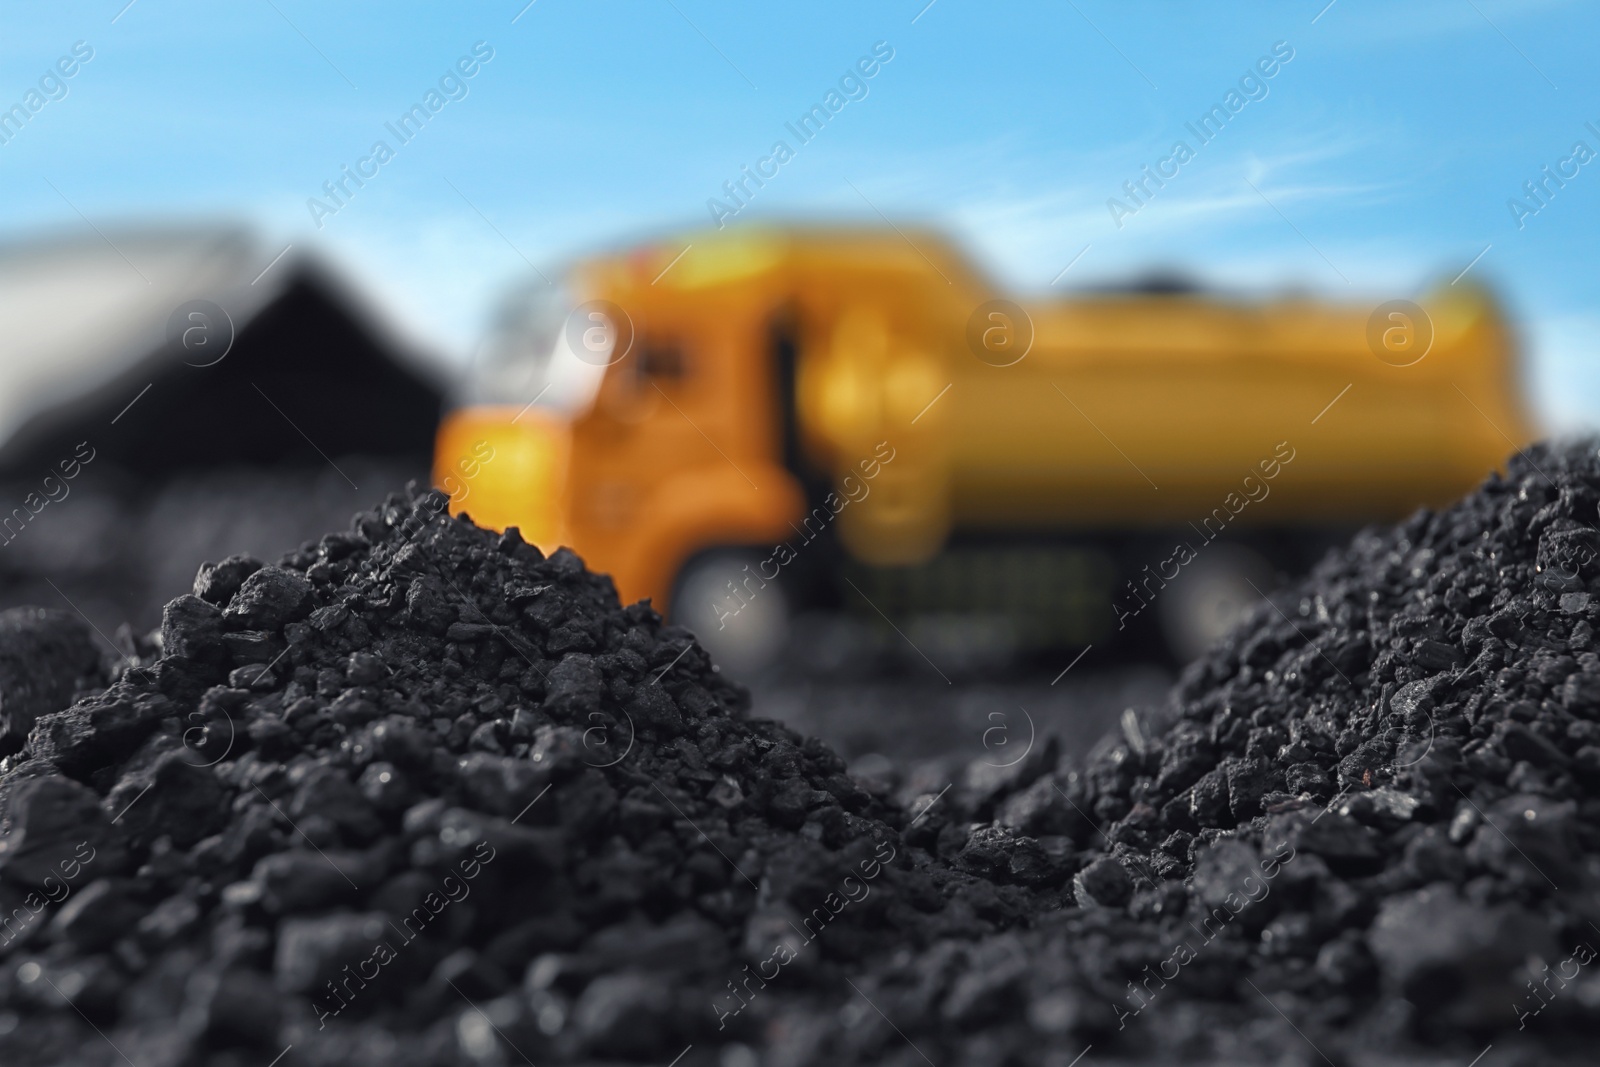 Image of Piles of coal and blurred yellow truck on background, closeup